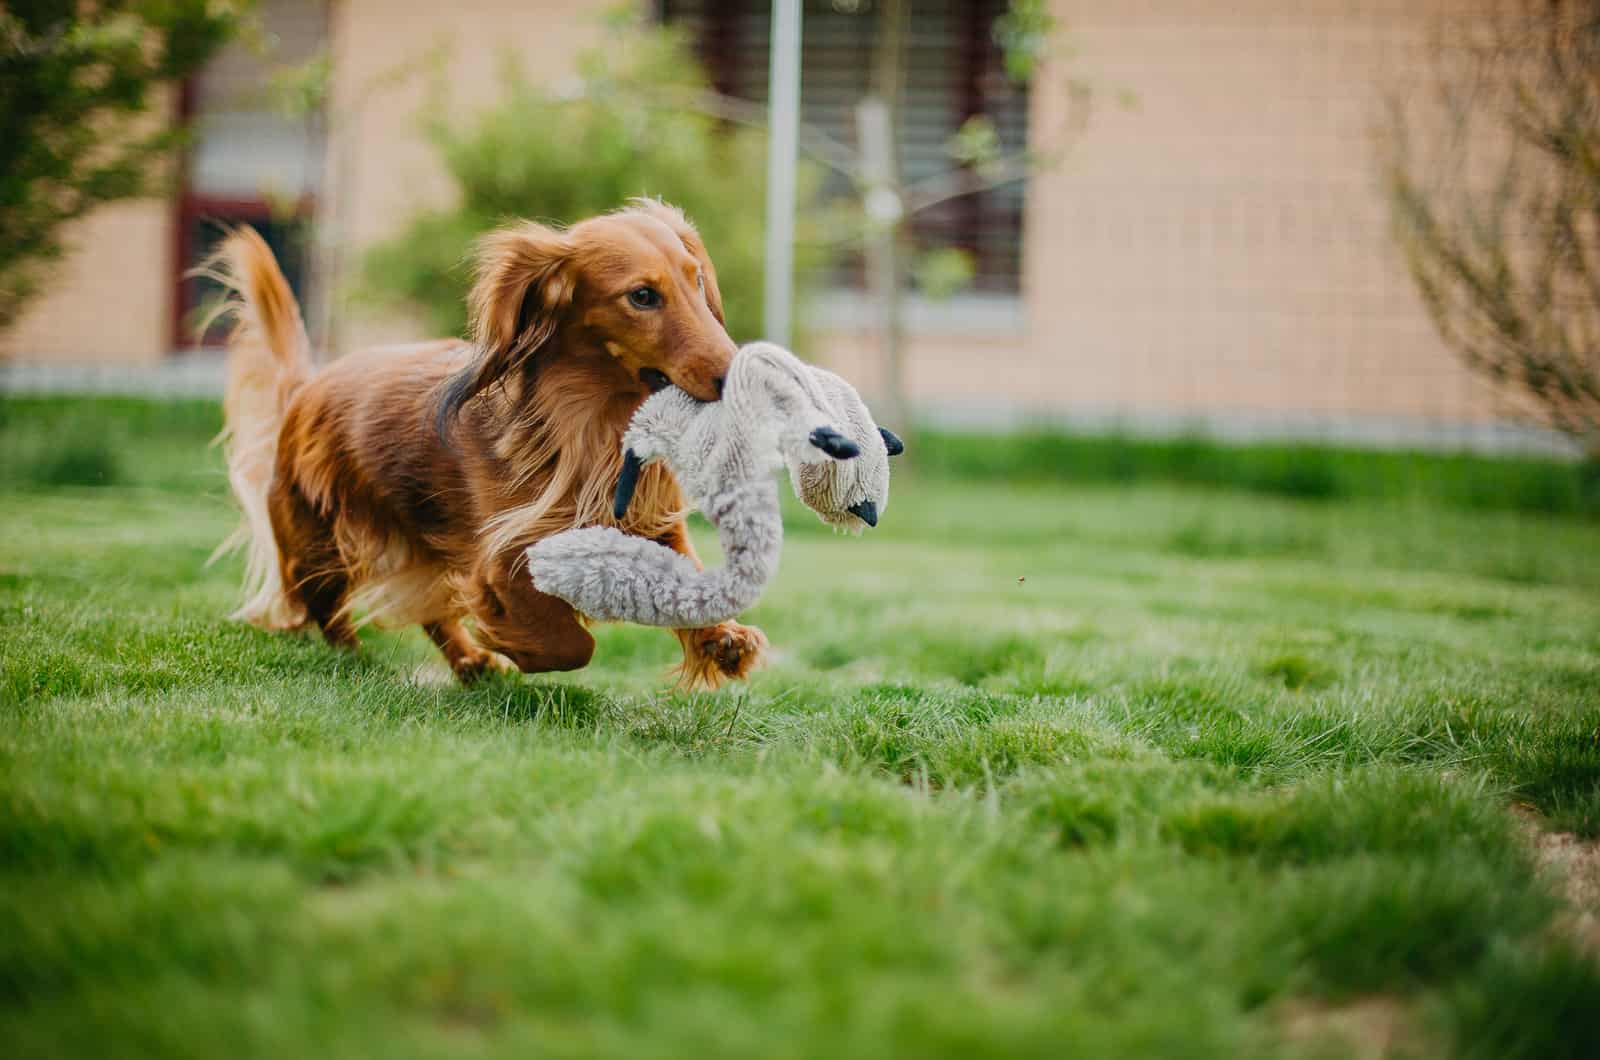 long-haired dachshund running with toy in mouth